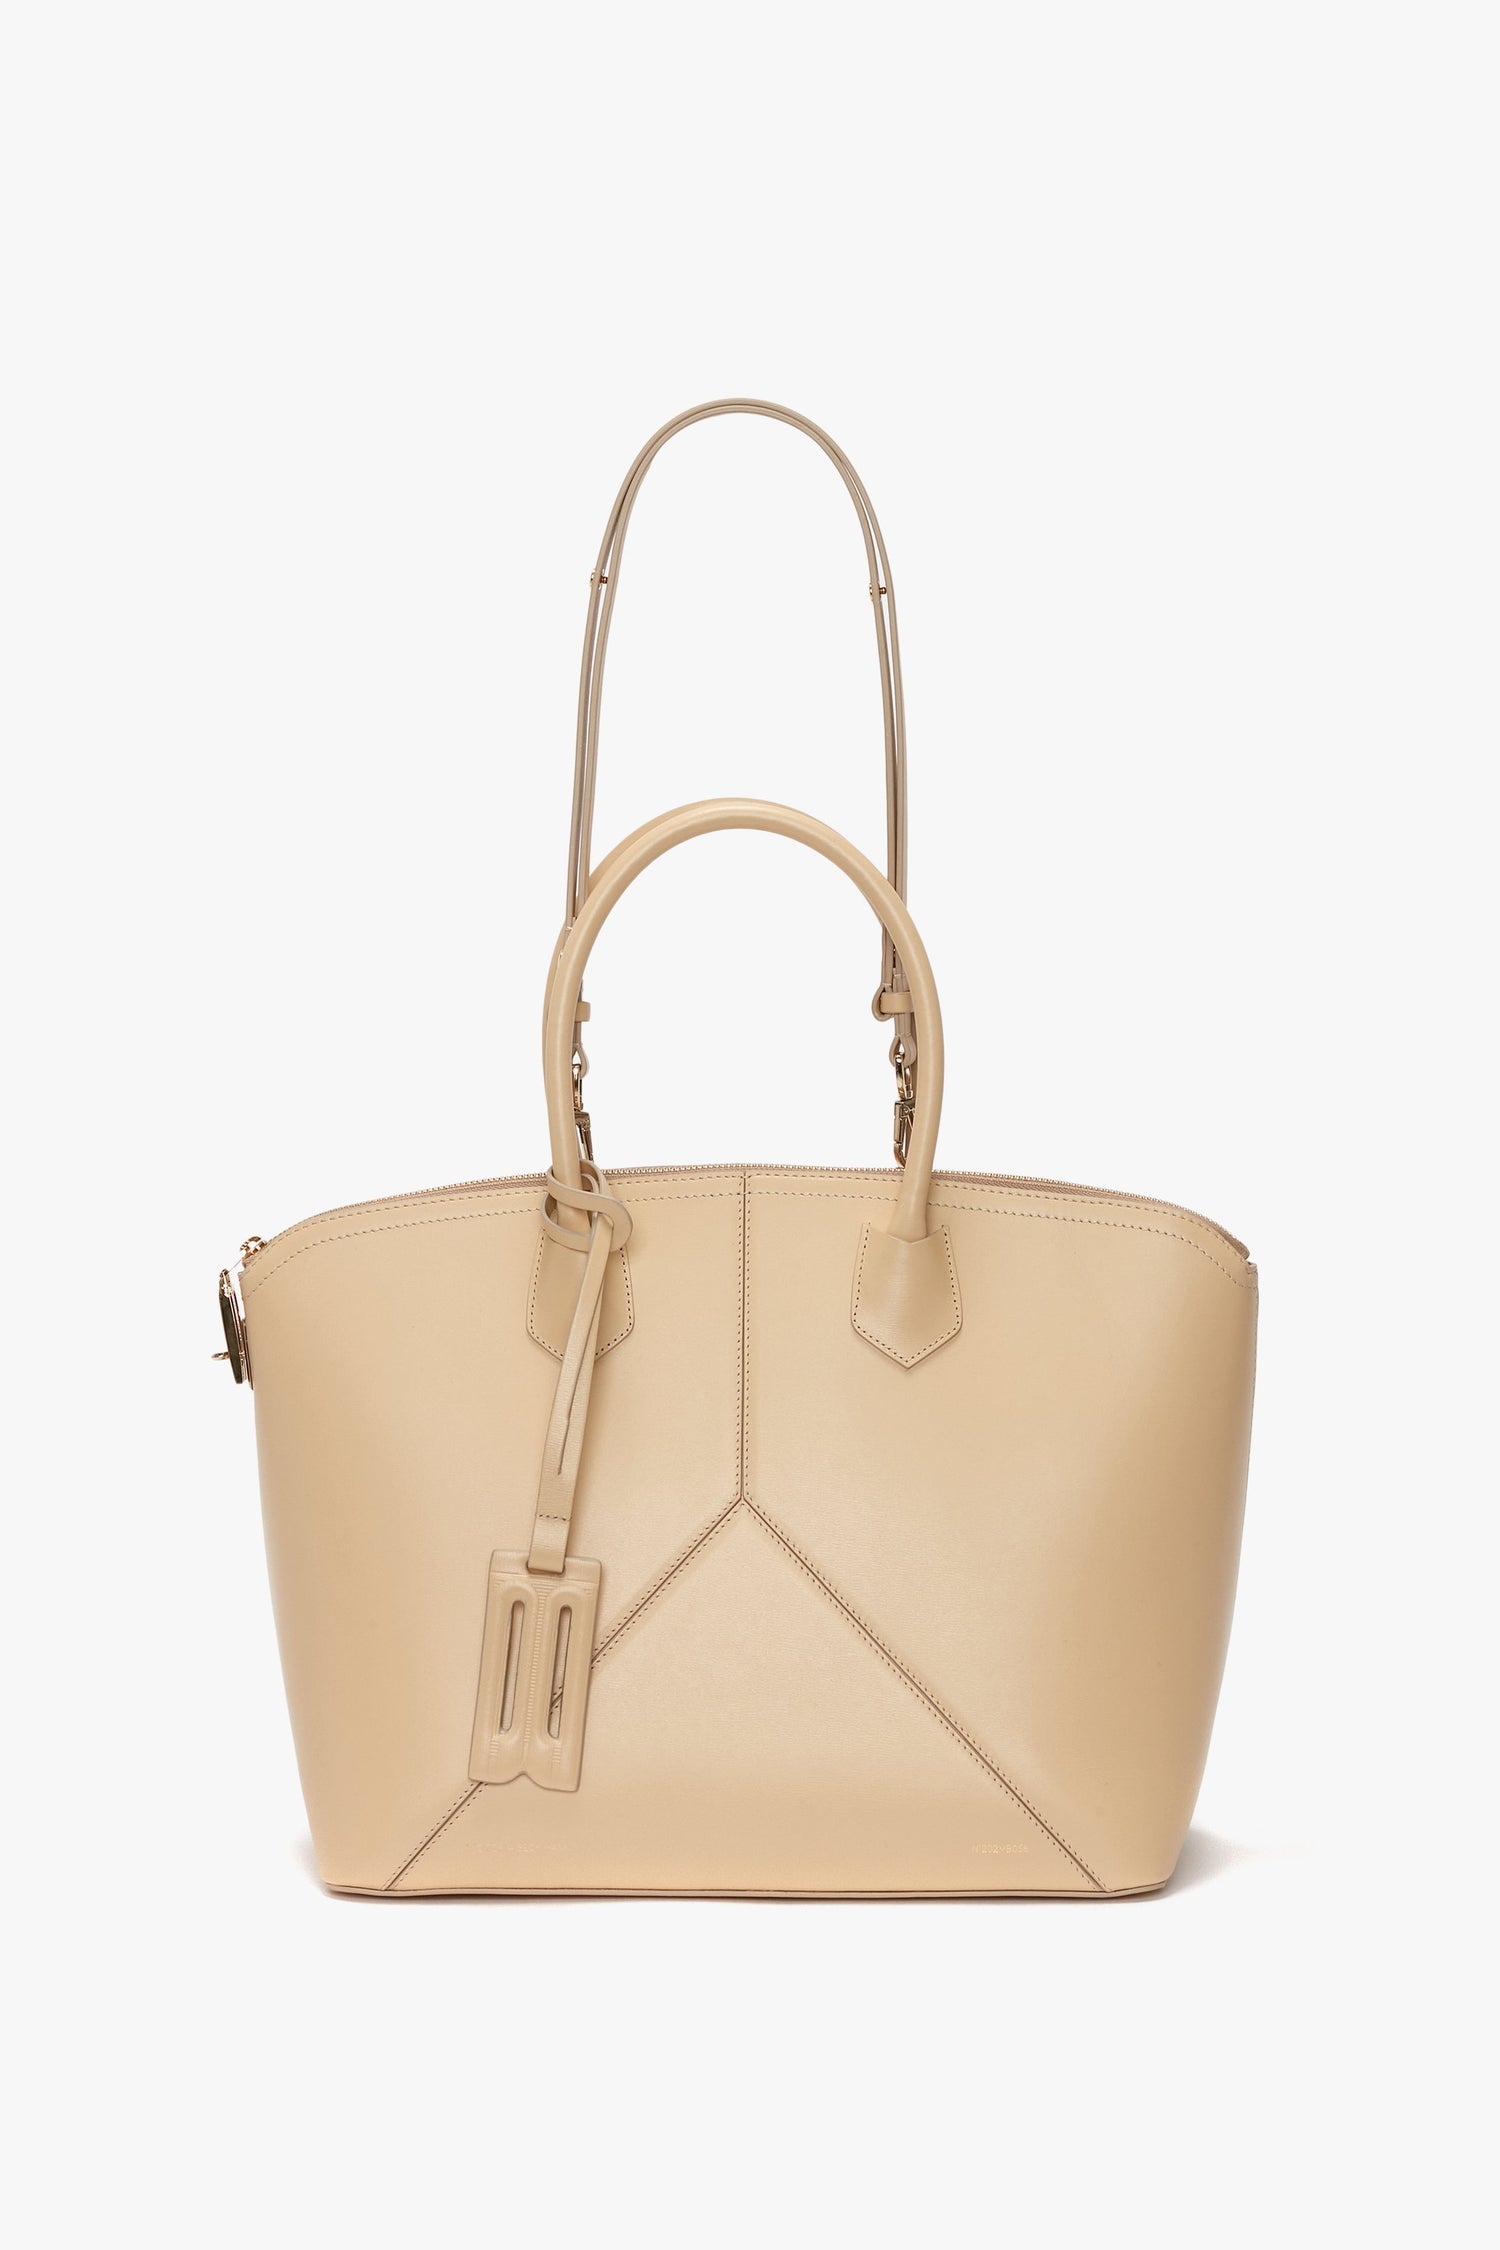 The Victoria Beckham Victoria Bag In Sesame Leather is a tan leather handbag with dual handles and an adjustable, detachable shoulder strap, featuring angular stitched leather panels on the front.